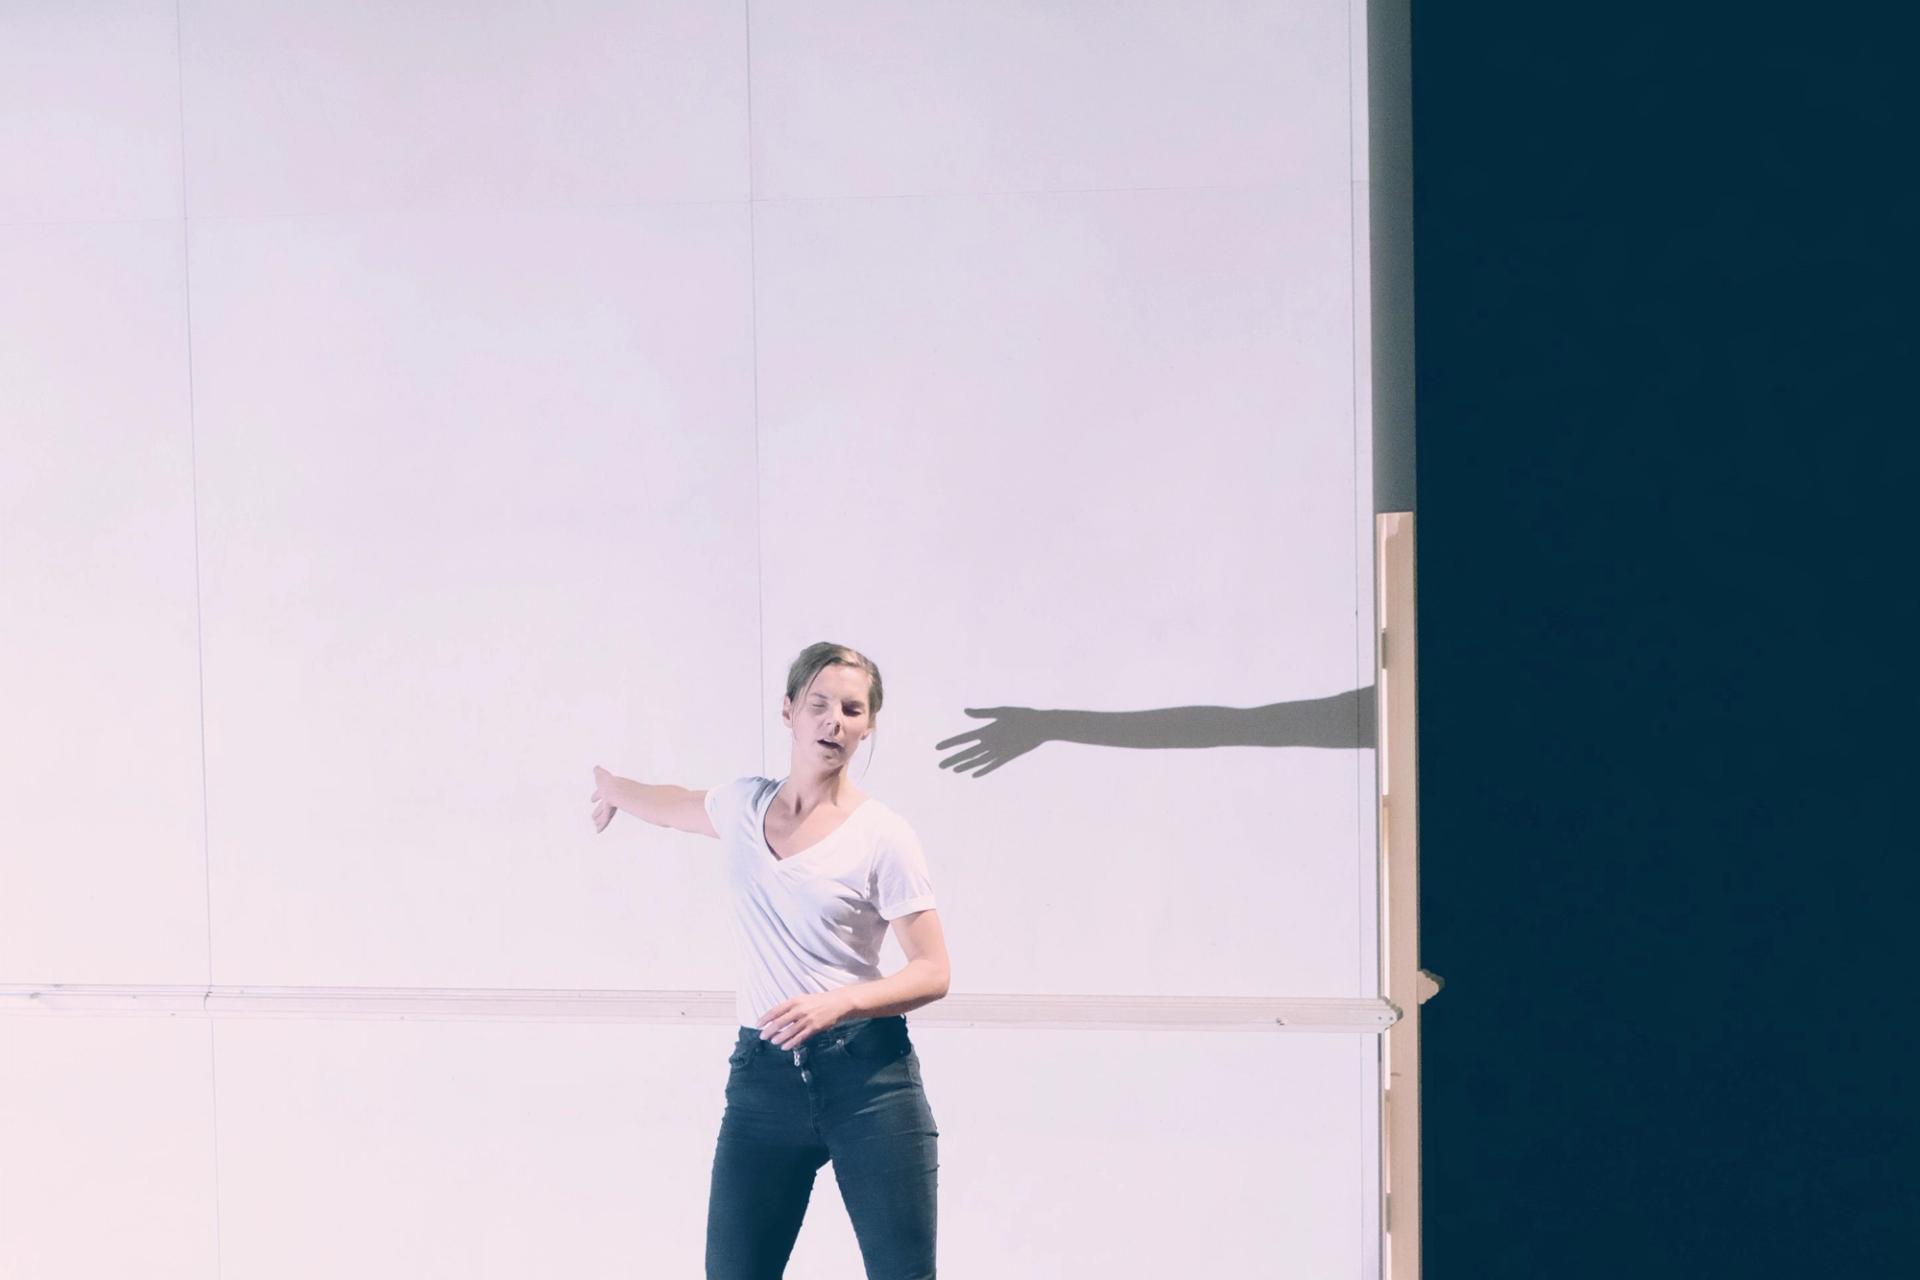 Ingrid is standing on stage in front of a wall that serves as a backdrop. Her eyes are closed and her arms is stretched out, casting a shadow on the wall behind her. 